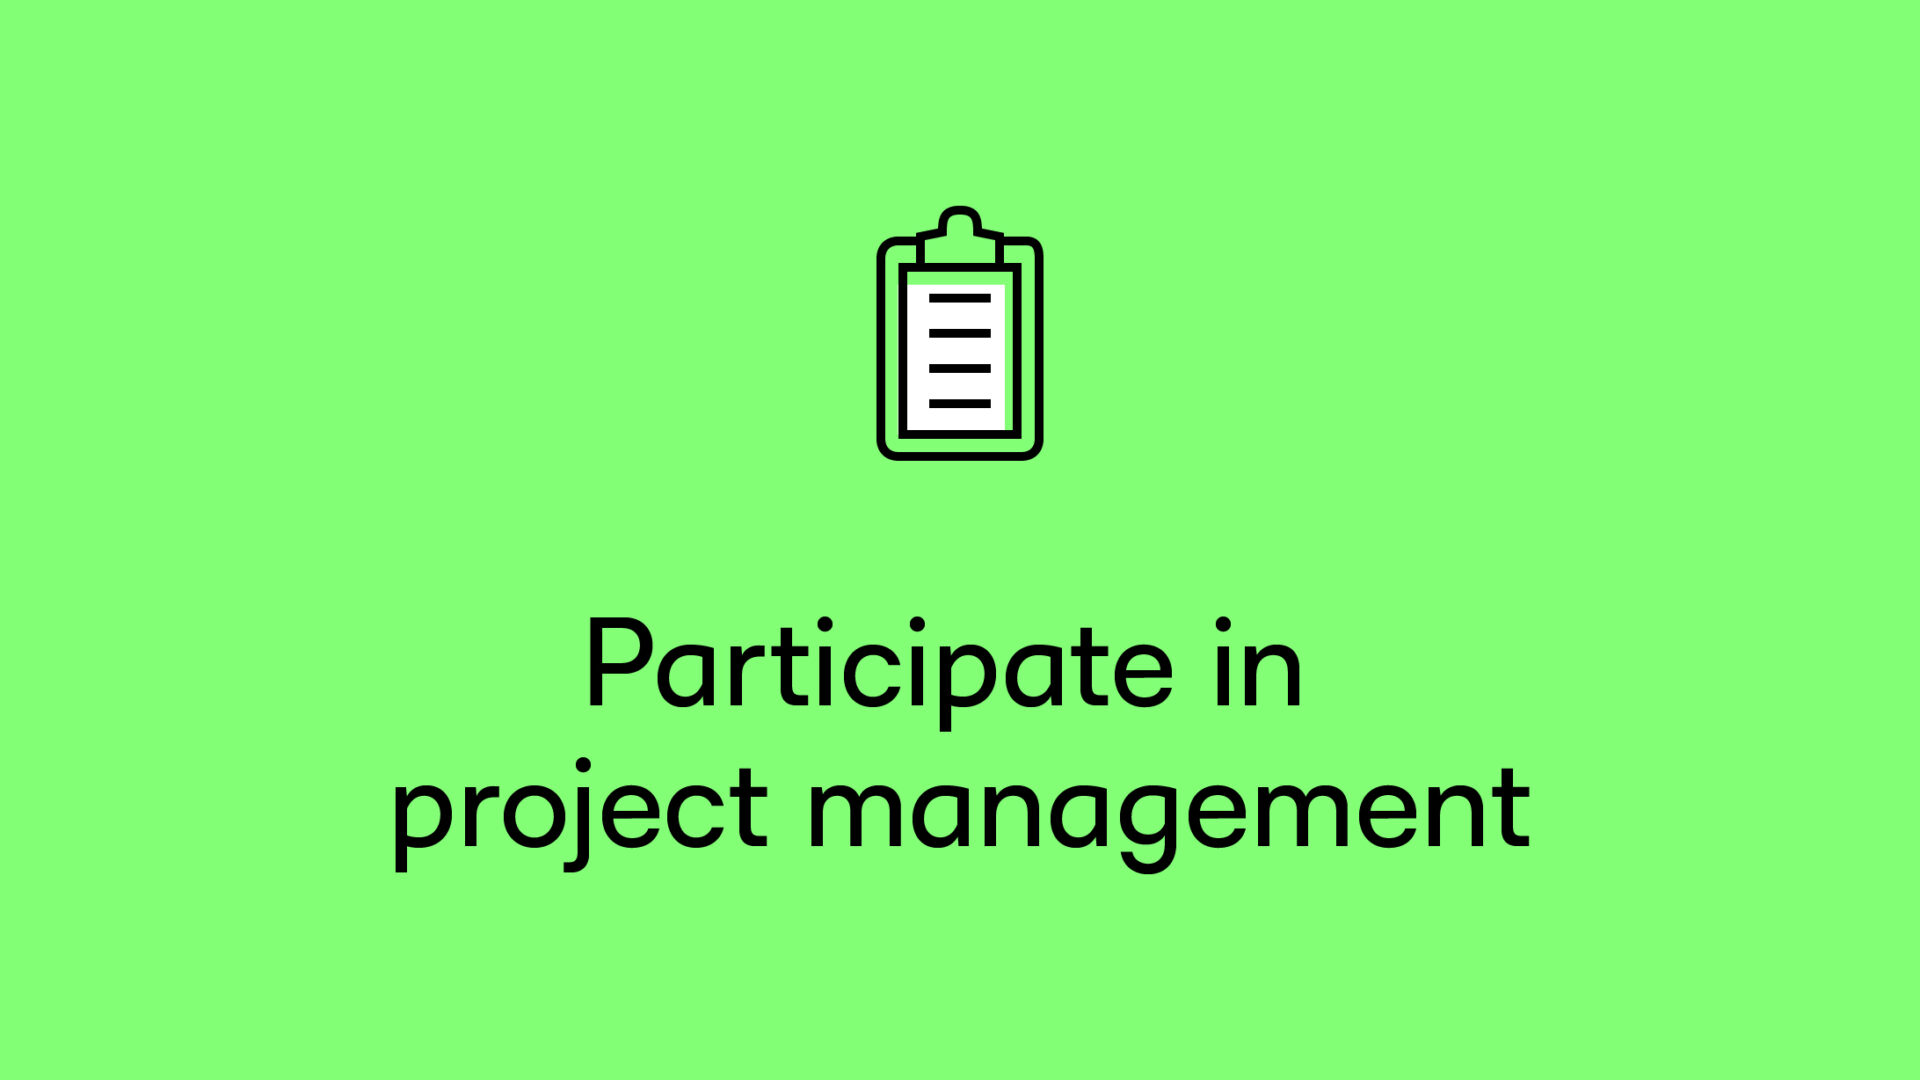 Participate in project management